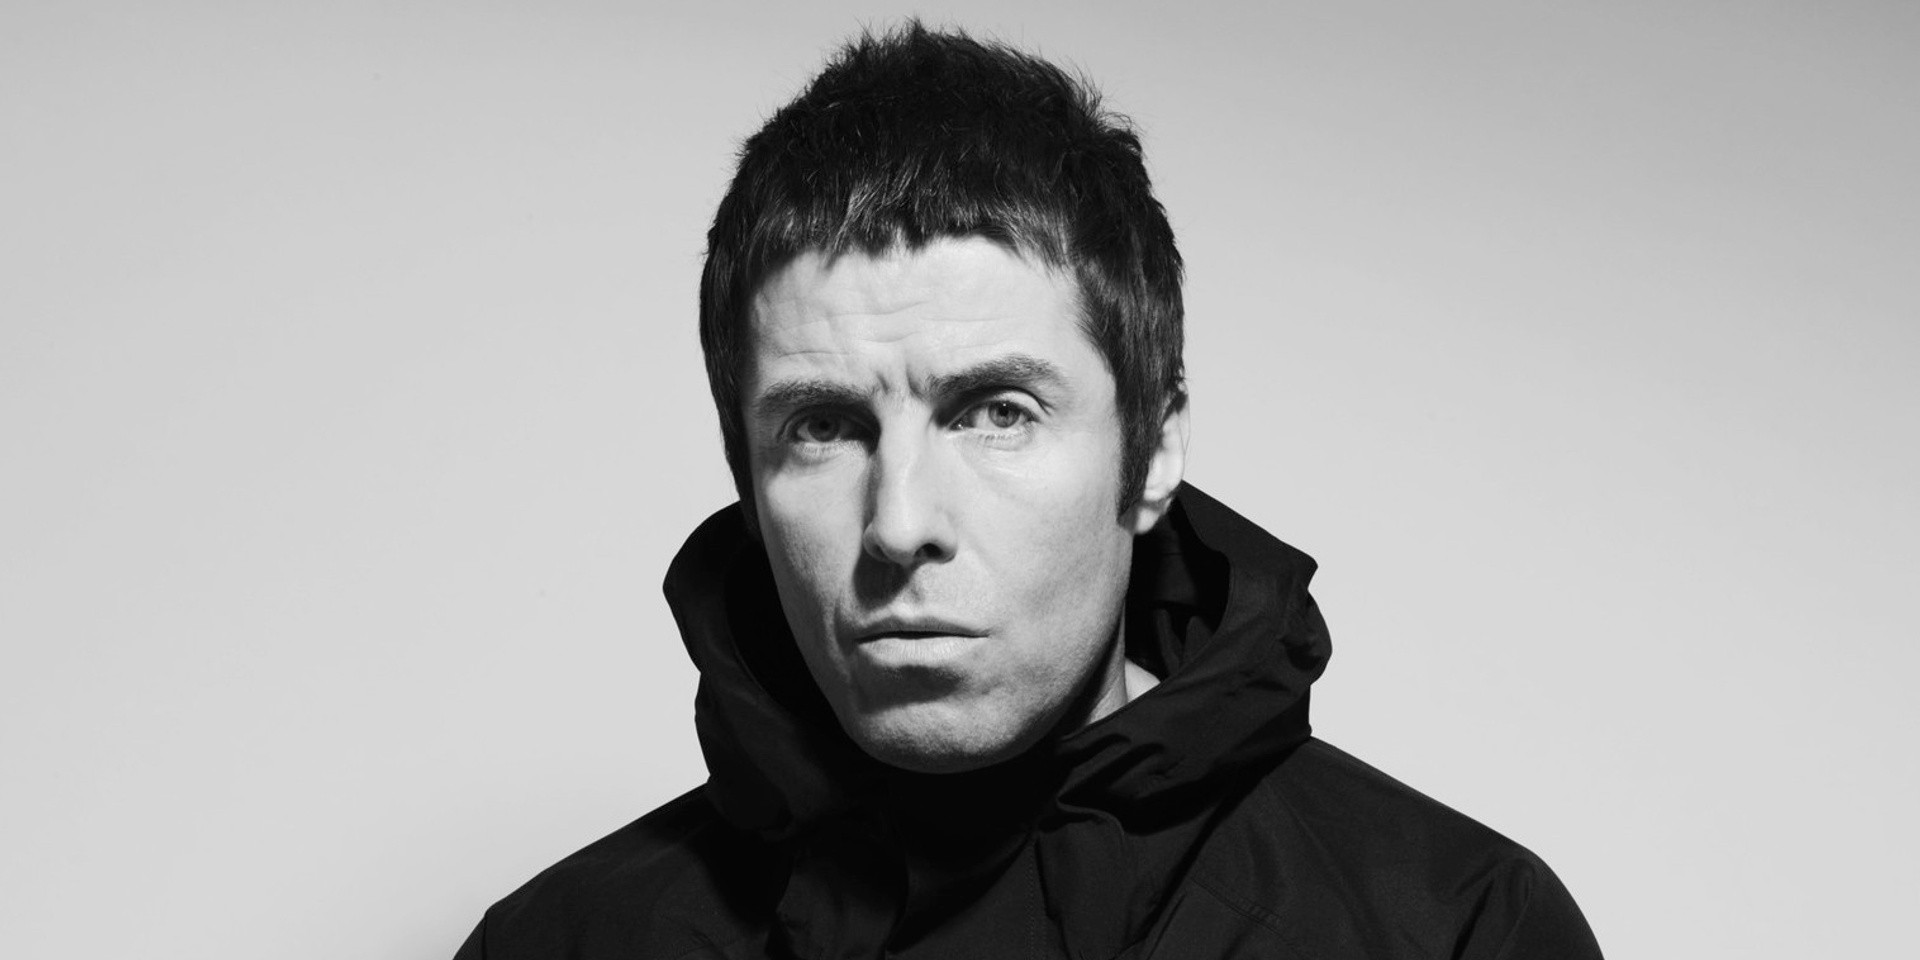 A new trailer for Liam Gallagher's As It Was documentary has arrived 